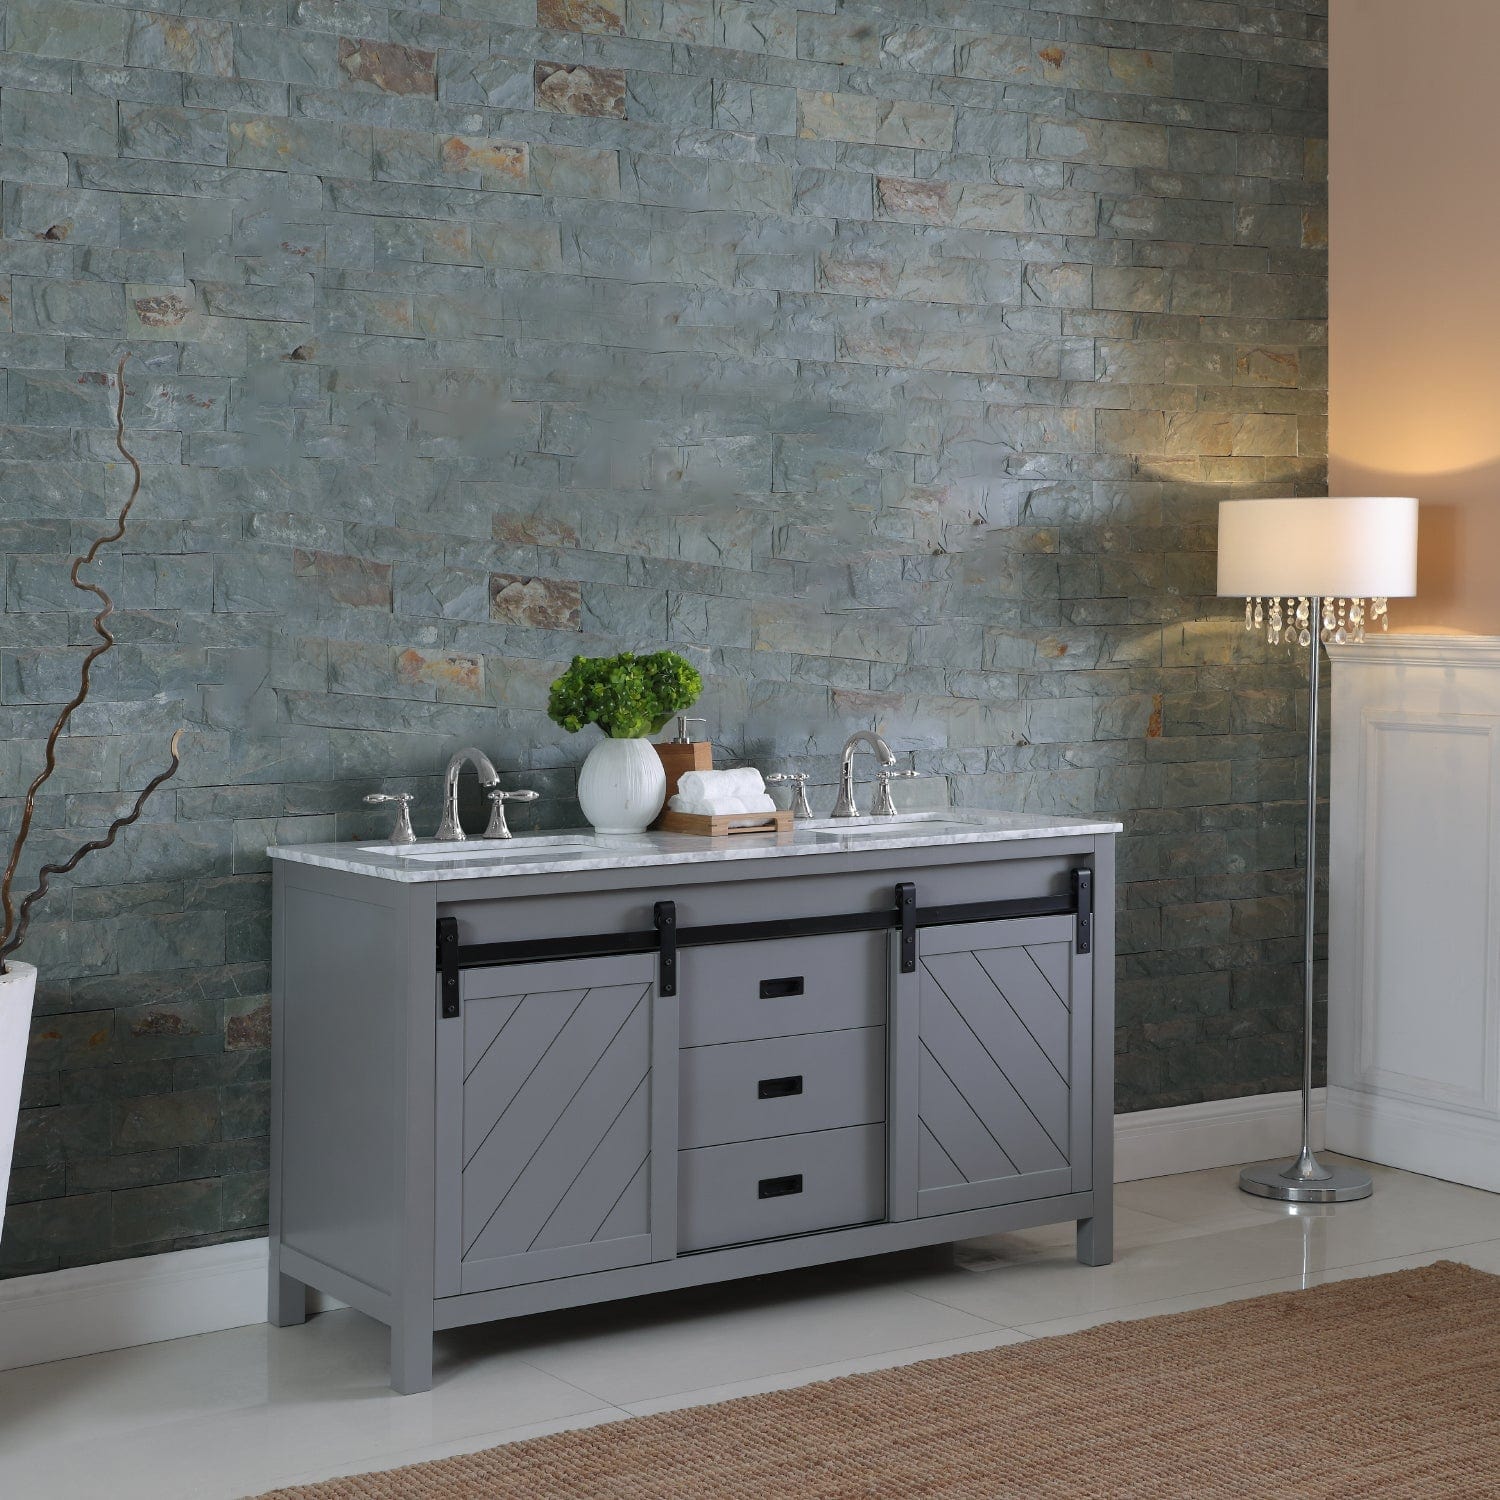 Altair Kinsley 60" Double Bathroom Vanity Set in Gray and Carrara White Marble Countertop without Mirror 536060-GR-CA-NM - Molaix631112970525Vanity536060-GR-CA-NM